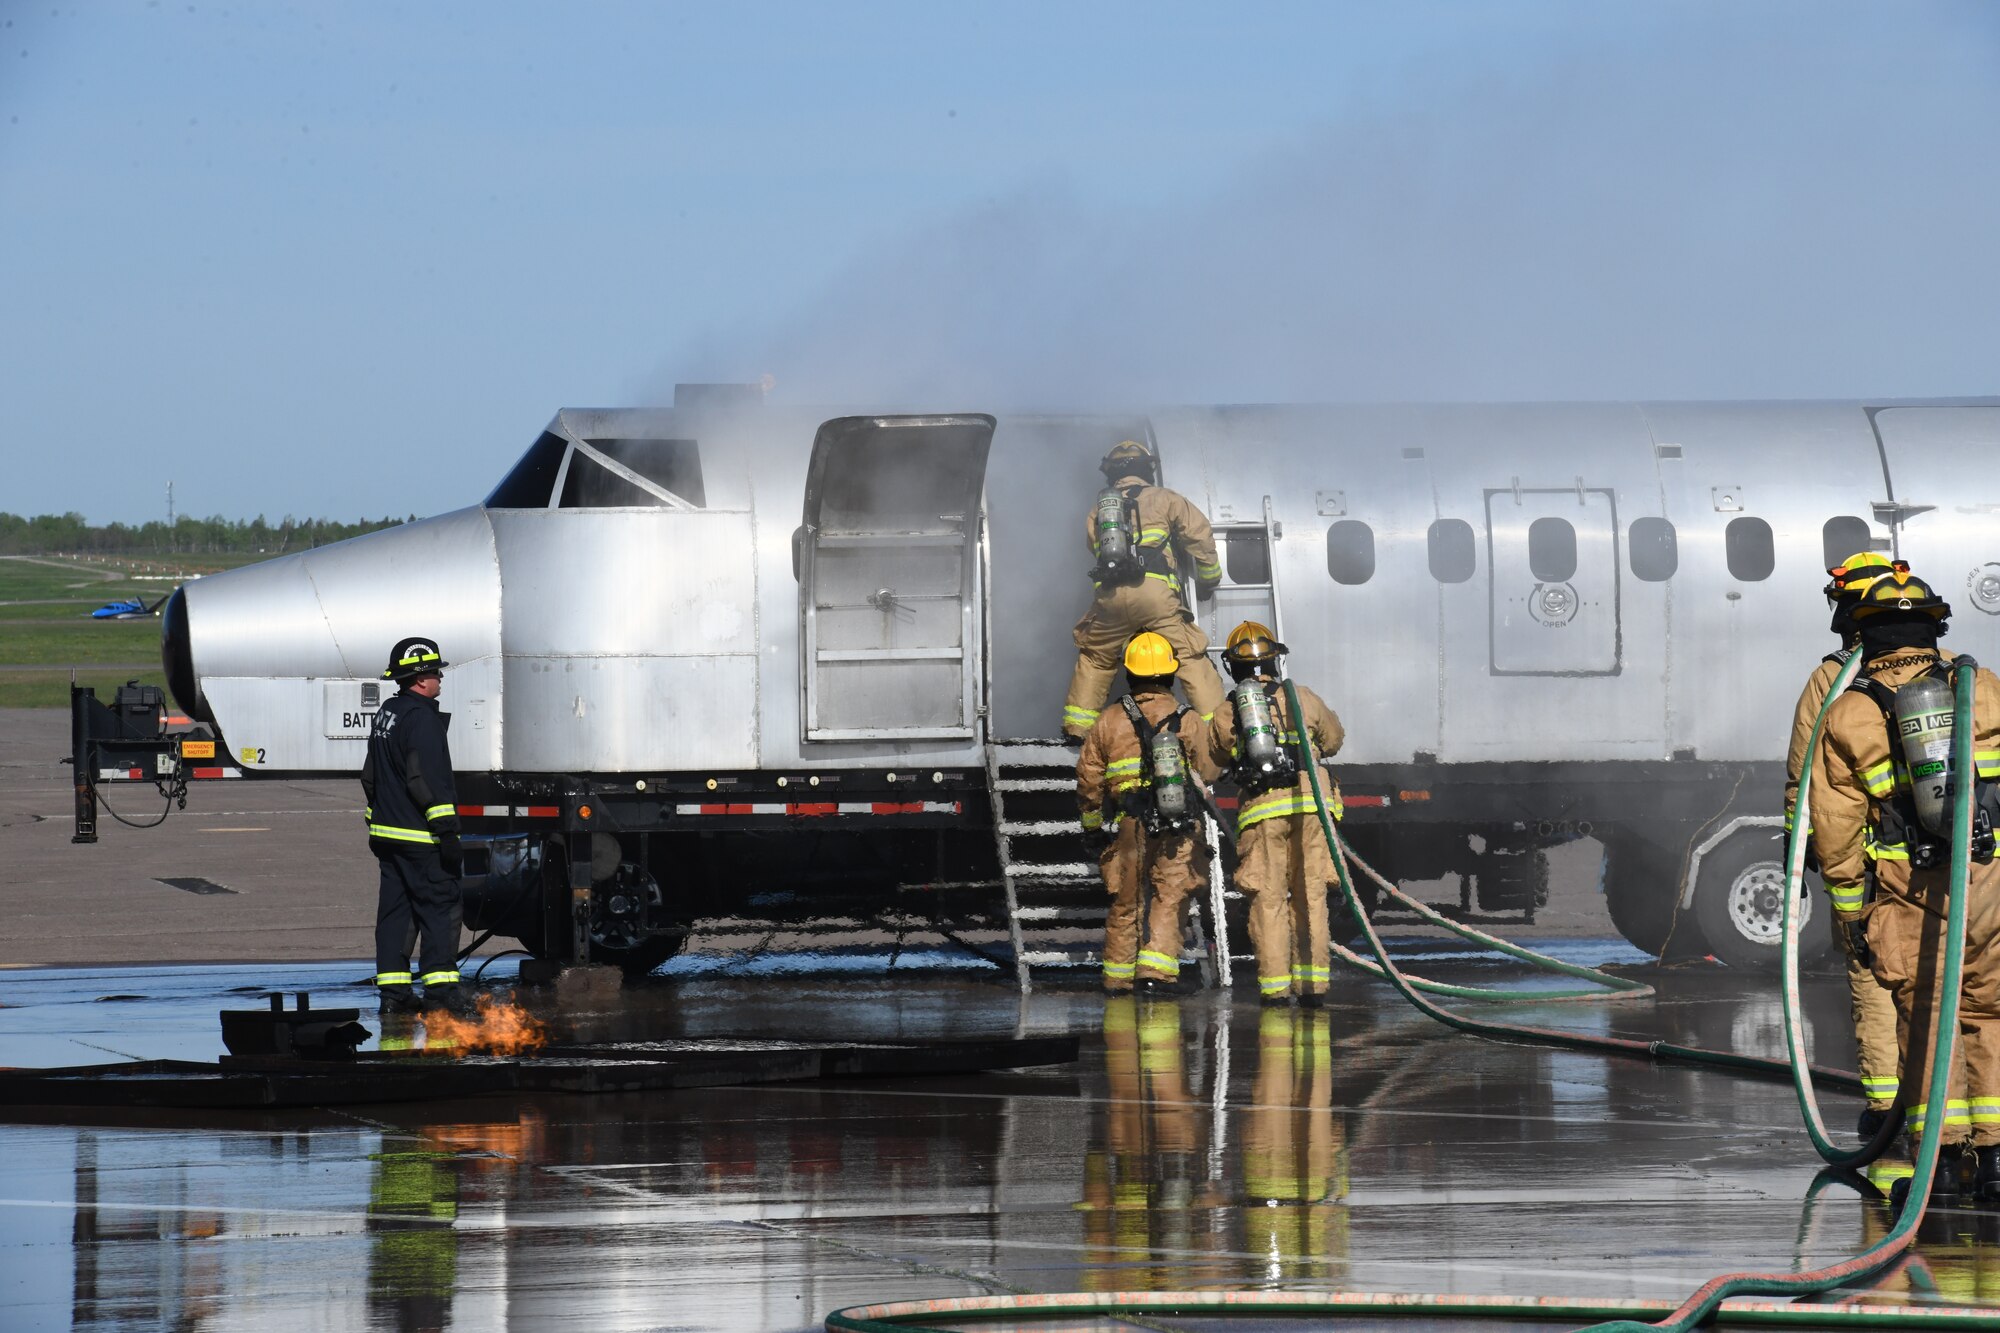 148th Fighter Wing first responders and 25 partnering agencies participated in a full-scale Triennial exercise at the Duluth International Airport, Duluth, Minnesota on June 2, 2022. The exercise simulated an aircraft striking a piece of large construction equipment upon touching down on the runway.